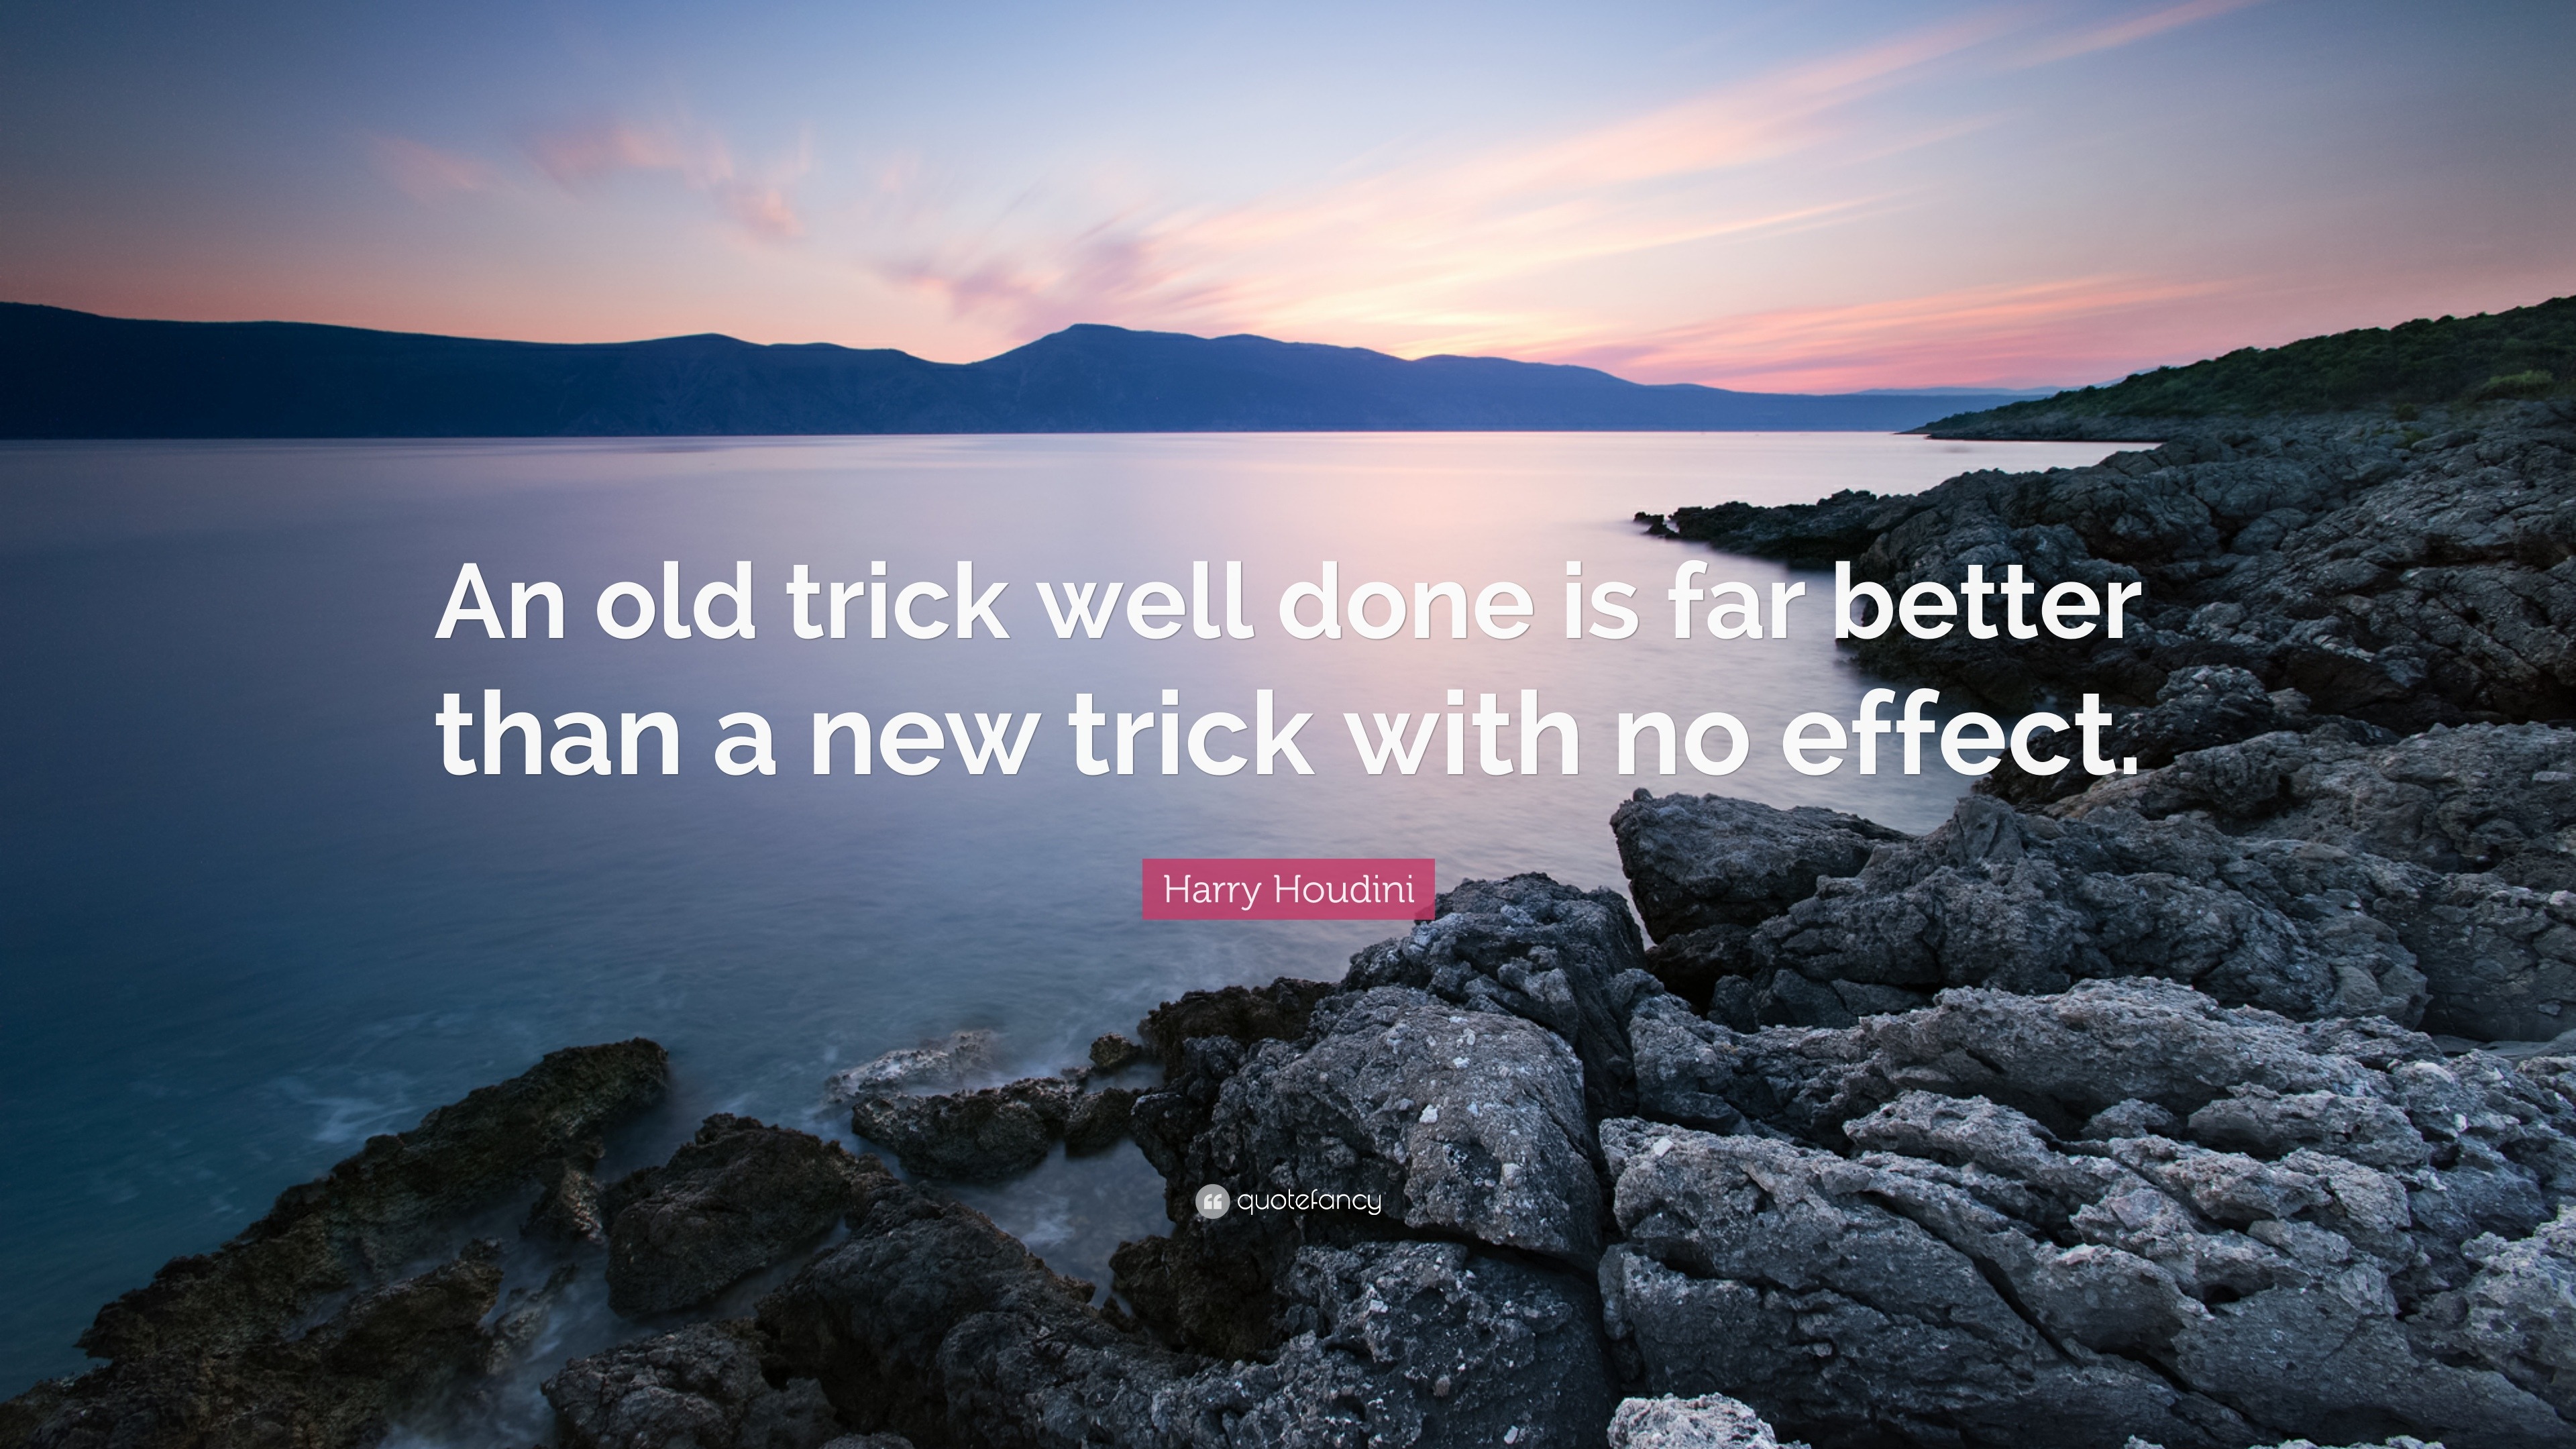 Harry Houdini Quote: “An Old Trick Well Done Is Far Better Than A New Trick With